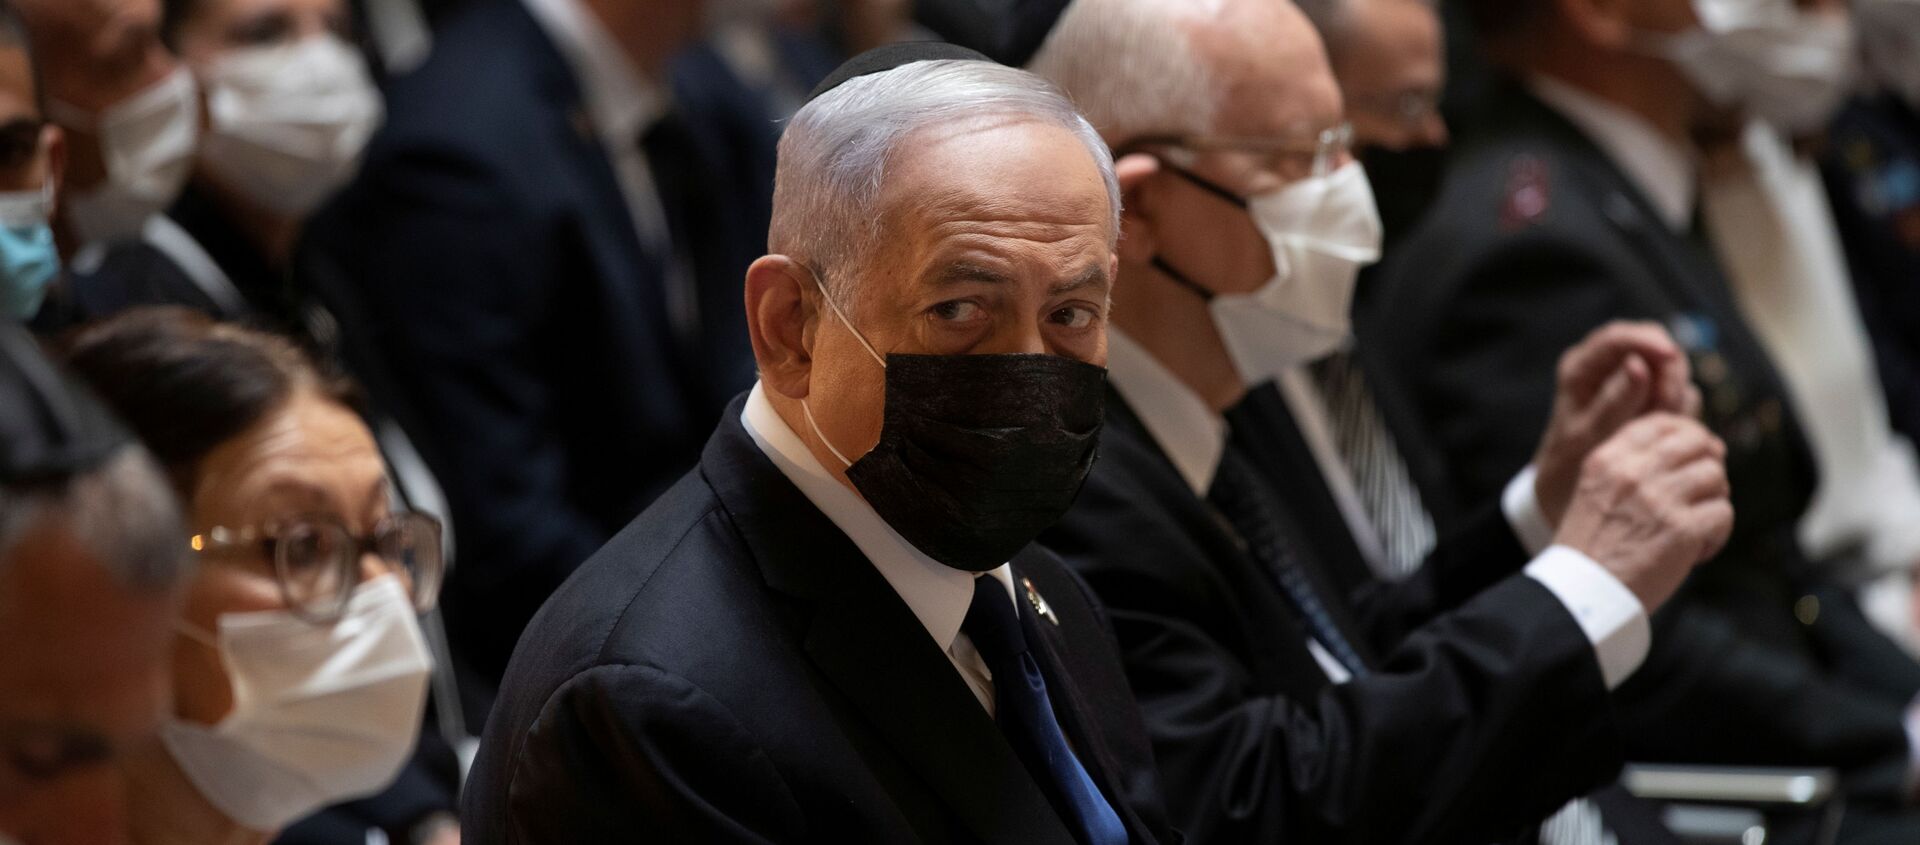 Israeli Prime Minister Benjamin Netanyahu attends an official ceremony marking Israel's Memorial Day, which commemorates Israel's fallen soldiers and Israeli victims of hostile attacks, at Mount Herzl military cemetery in Jerusalem April 14, 2021. - Sputnik International, 1920, 12.05.2021